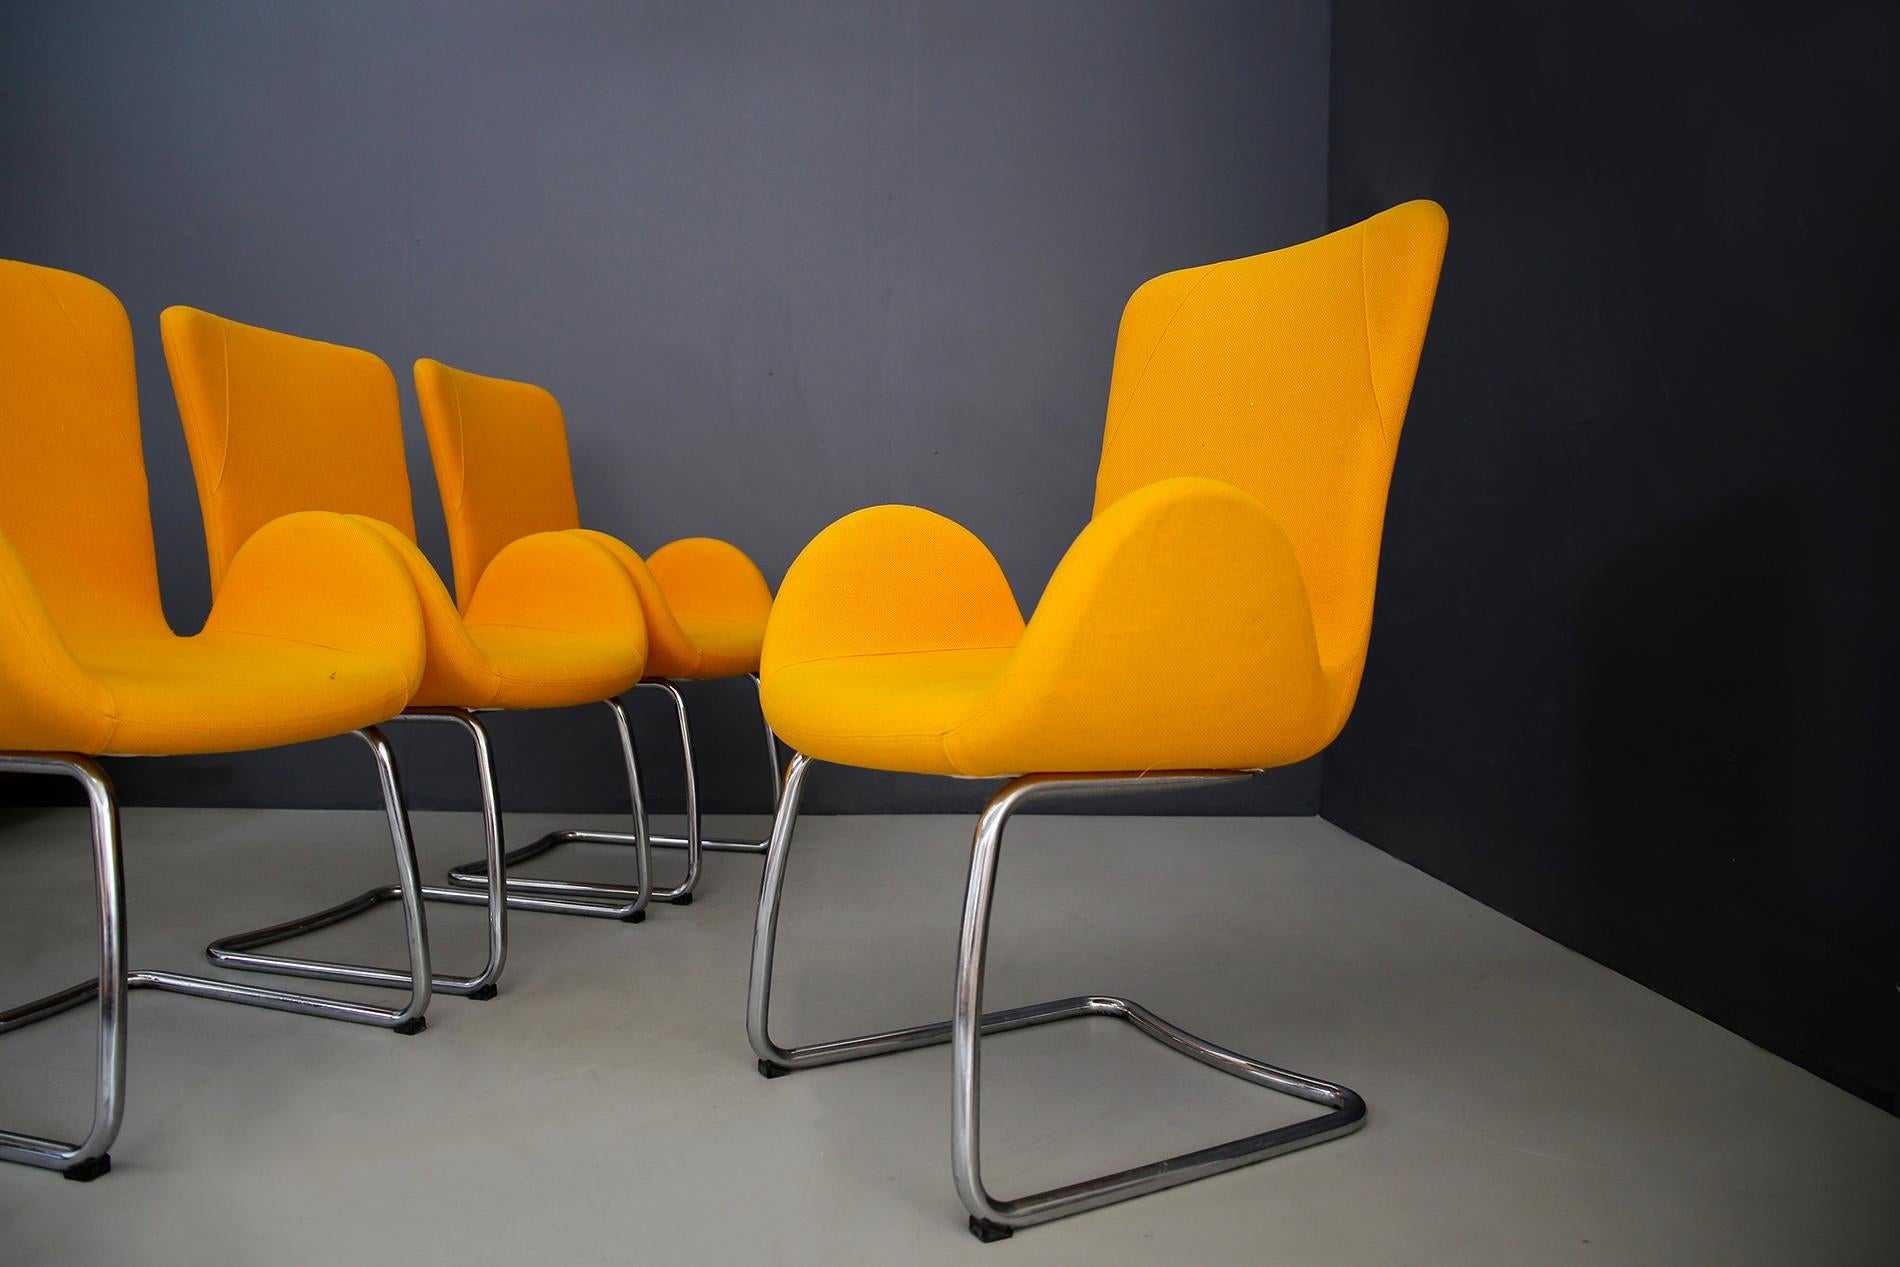 Italian Set of Four Midcentury Armchairs by Moroso with Original Label and Fabric, 1970s